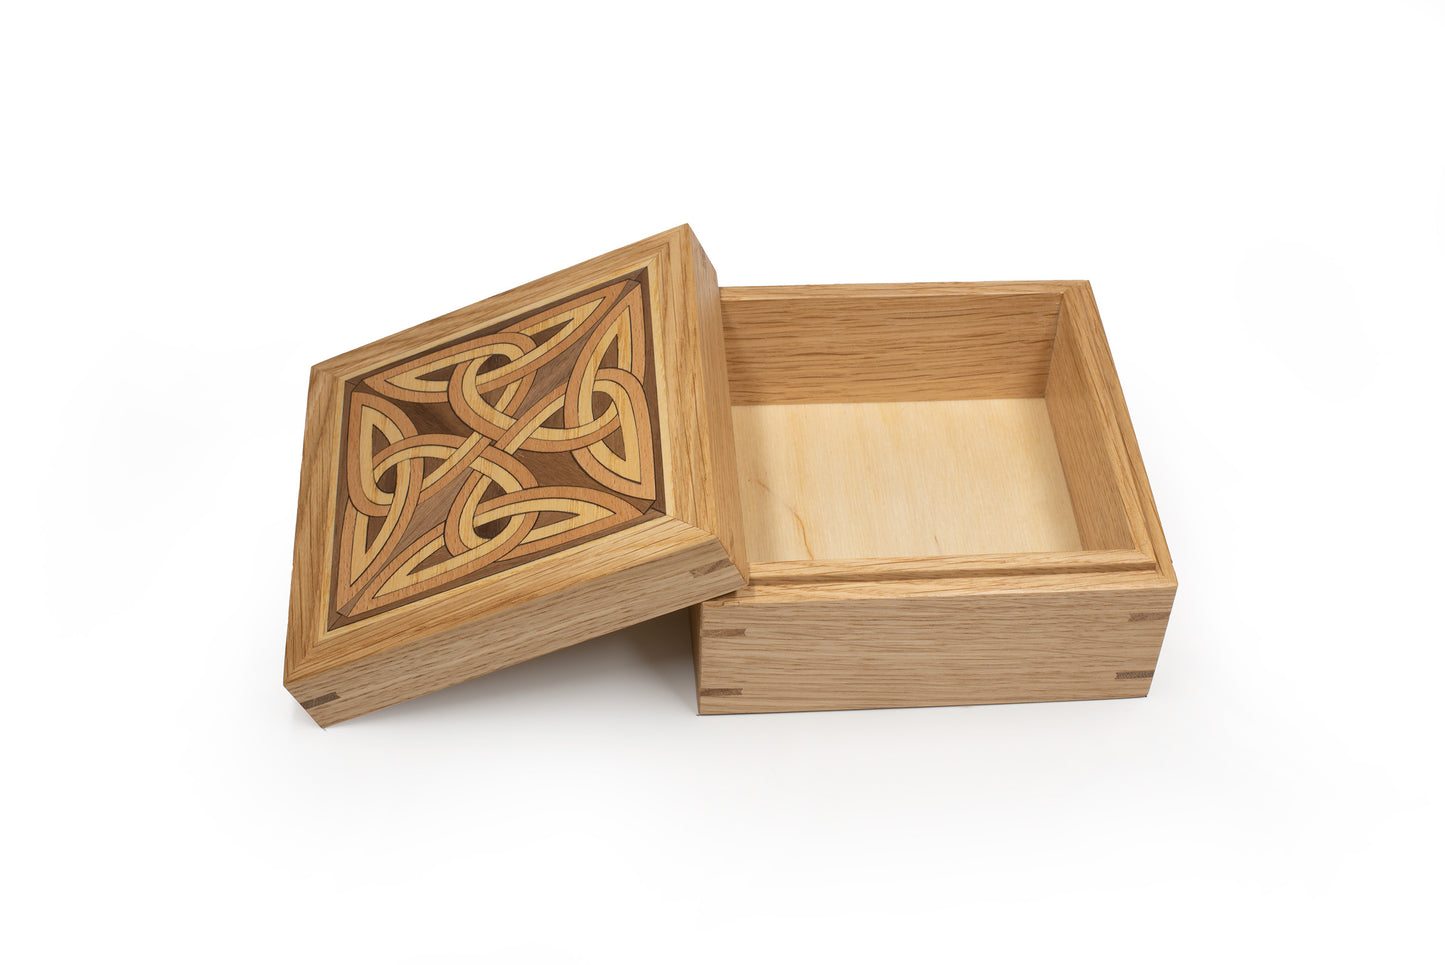 Celtic Marquetry Box, Handcrafted of Solid Oak with Strathmartin inlays, optional Personalised